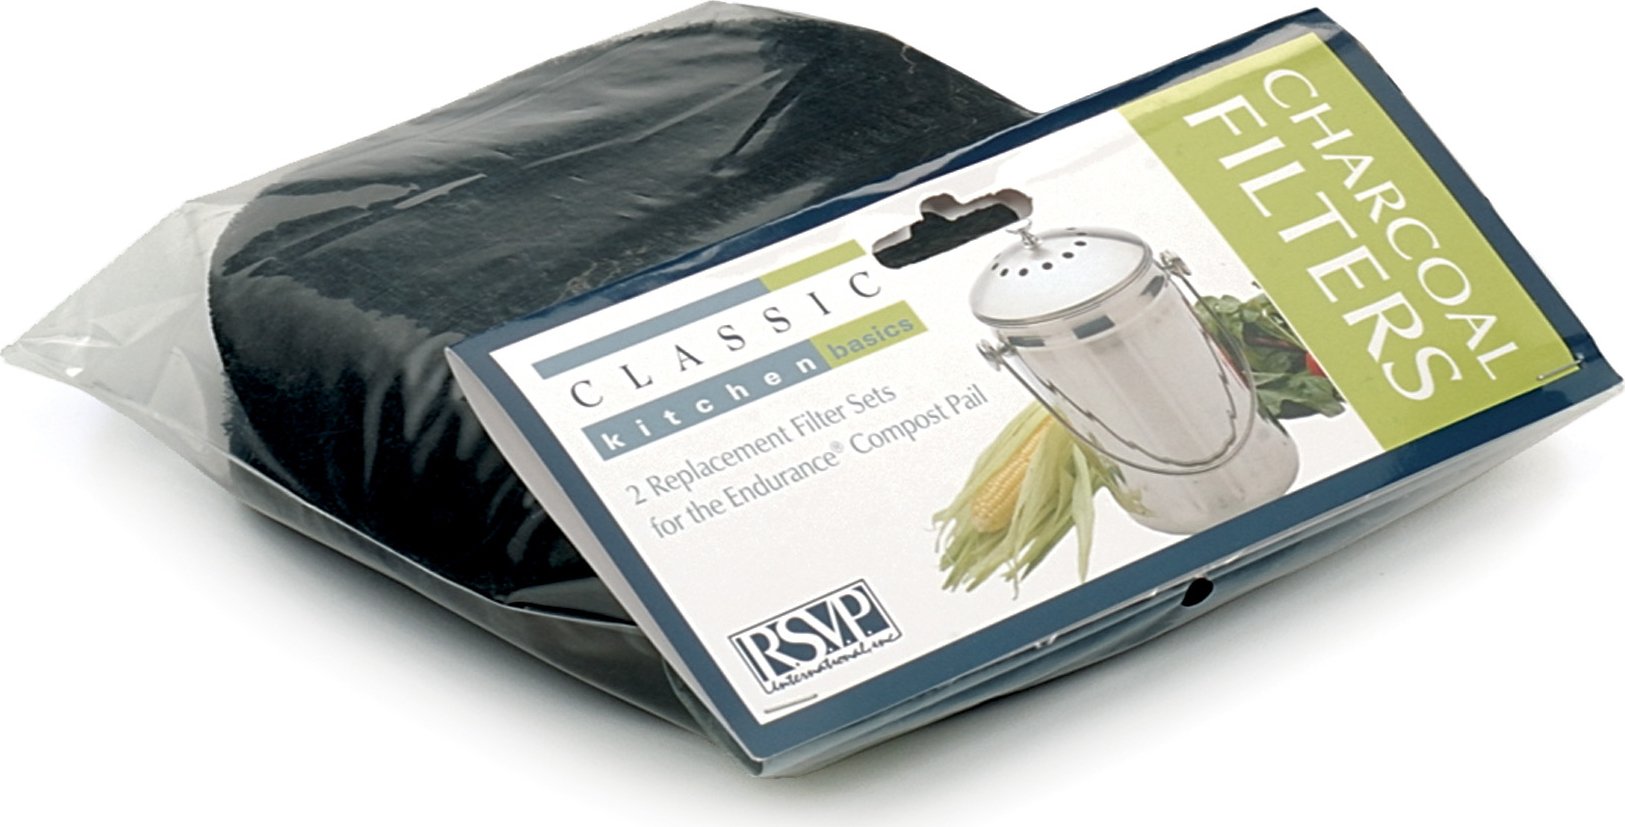 RSVP International - 1-Gallon Compost Pail Replacement Filters - FILTER